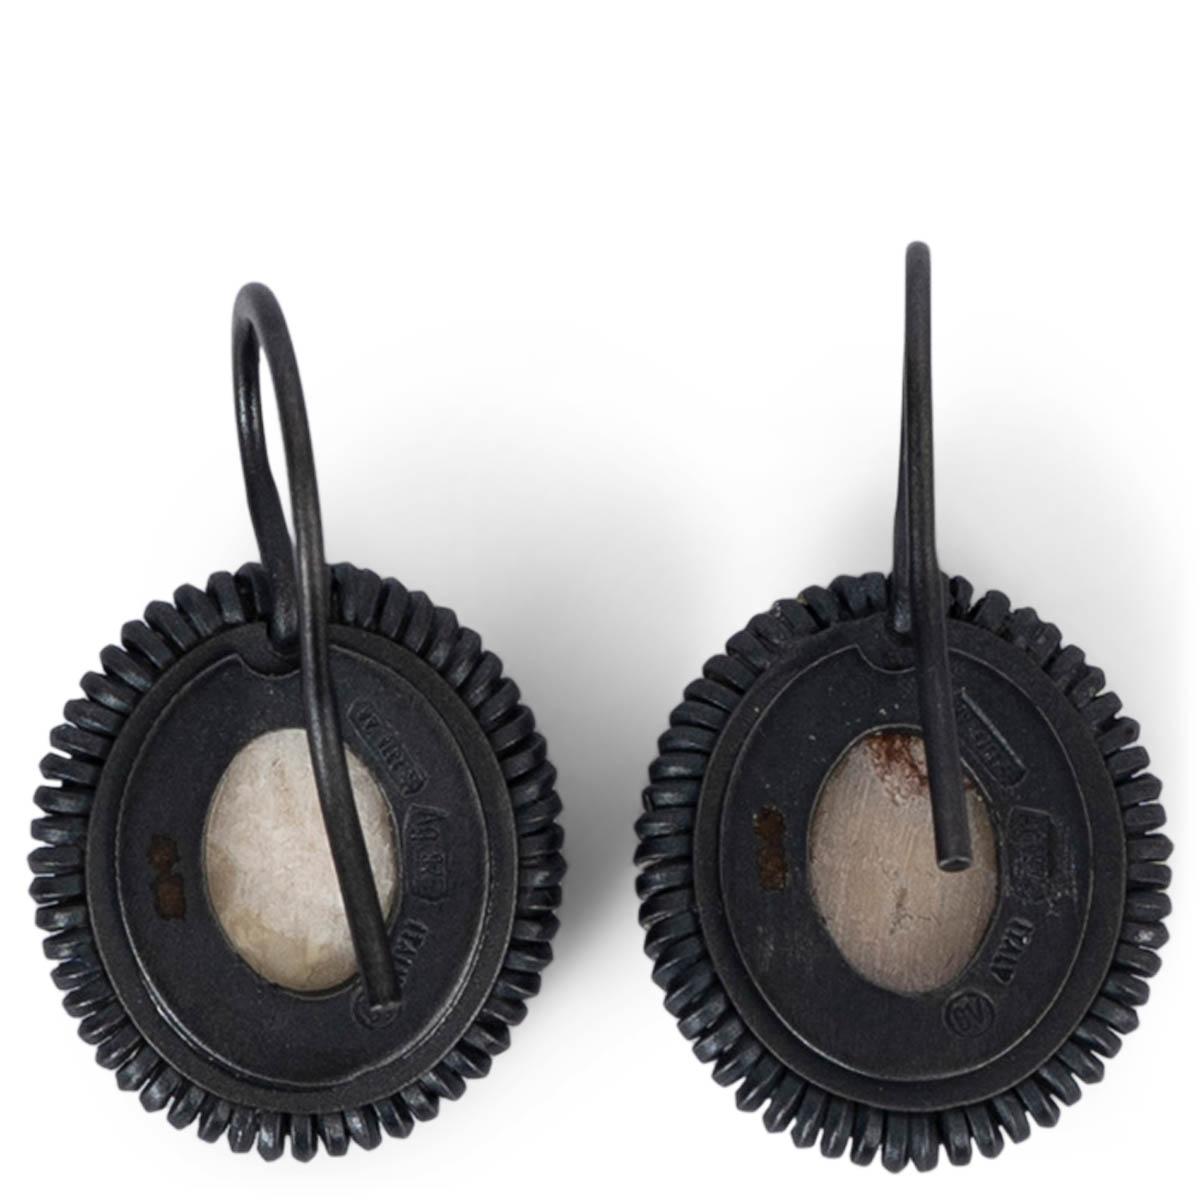 100% authentic Bottega Veneta Cameo drop earrings with oxidized sterling silver bezel. French hook closure. Have been worn and are in excellent condition. 

2011 Spring/Summer

Measurements
Width	0.7cm (0.3in)
Length	2.4cm (0.9in)
Hardware	Oxidized